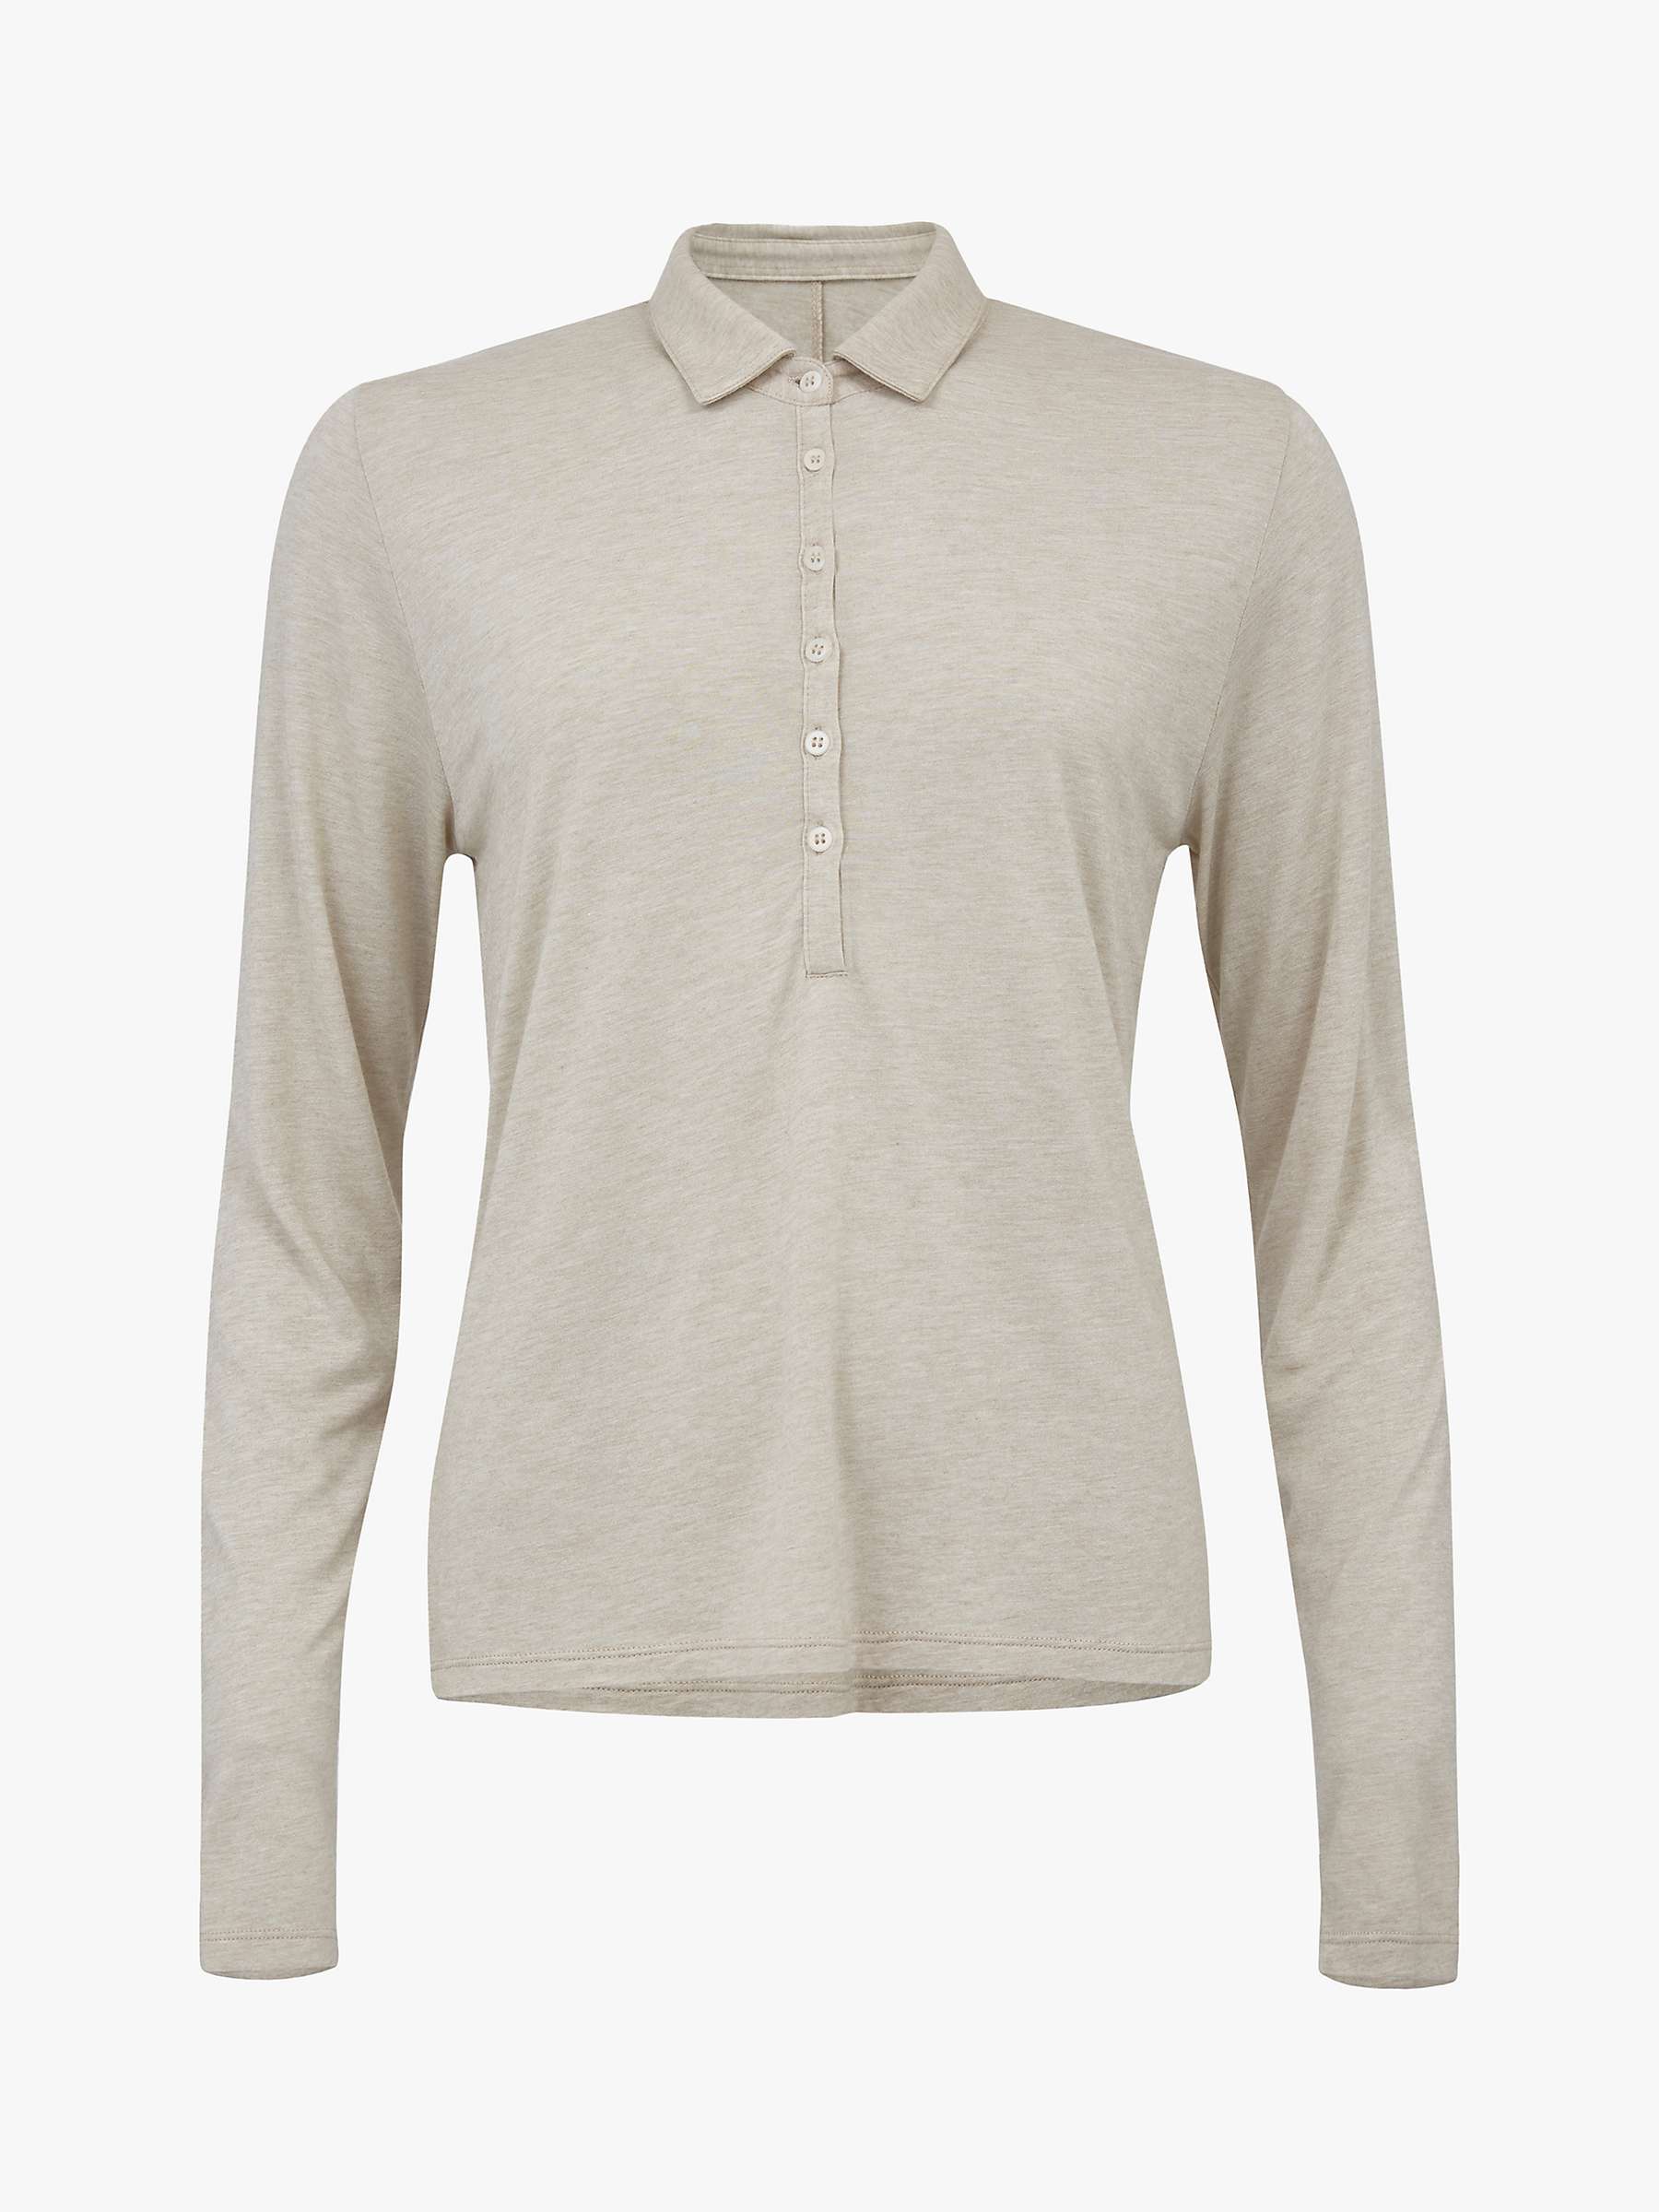 Buy Celtic & Co. Wool Blend Long Sleeve Polo Shirt, Oatmeal Online at johnlewis.com